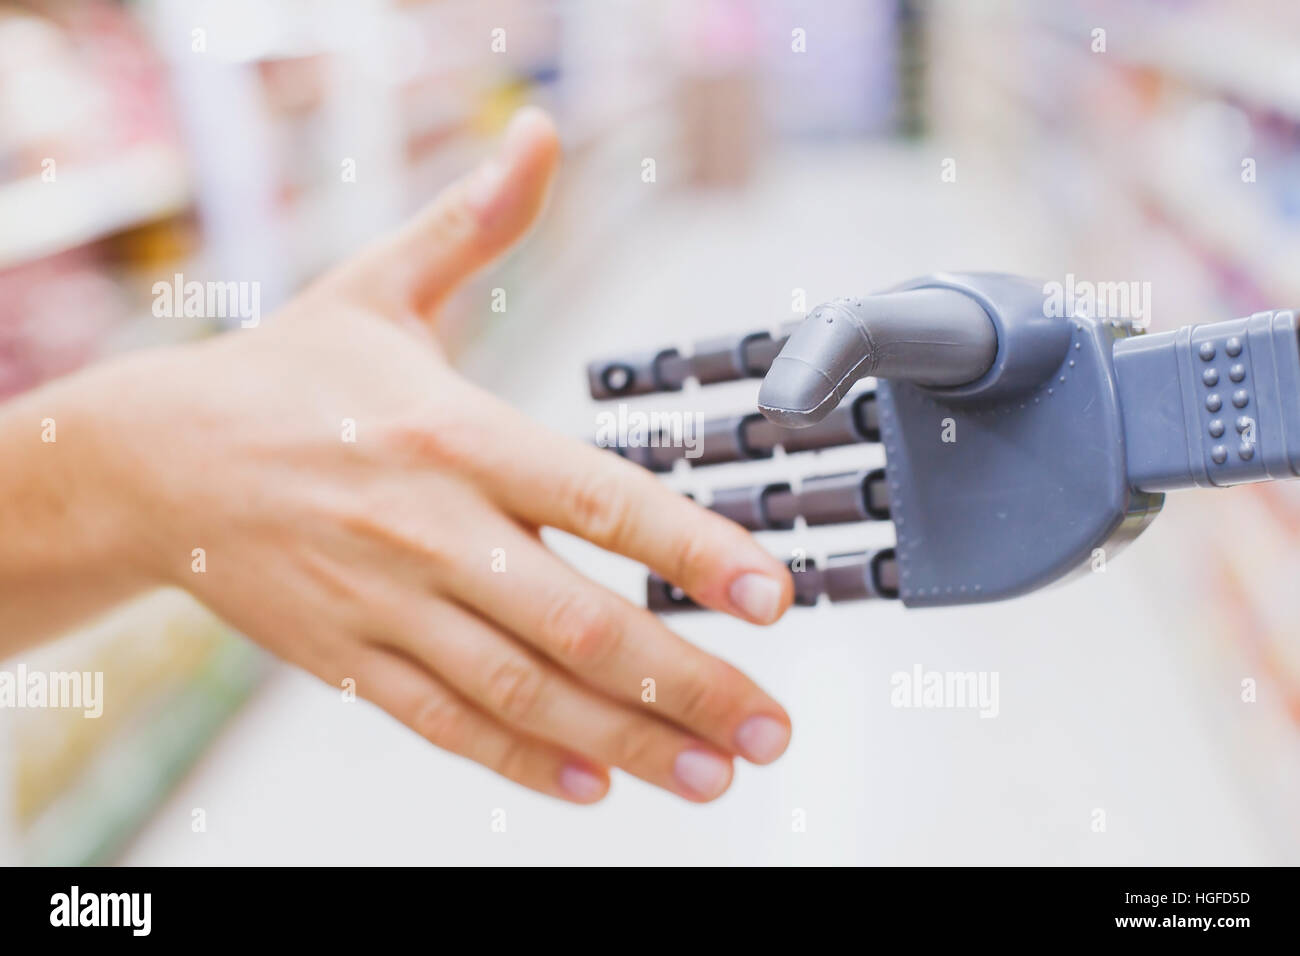 robot and human hands in handshake, high tech in everyday life, meet droid technology Stock Photo